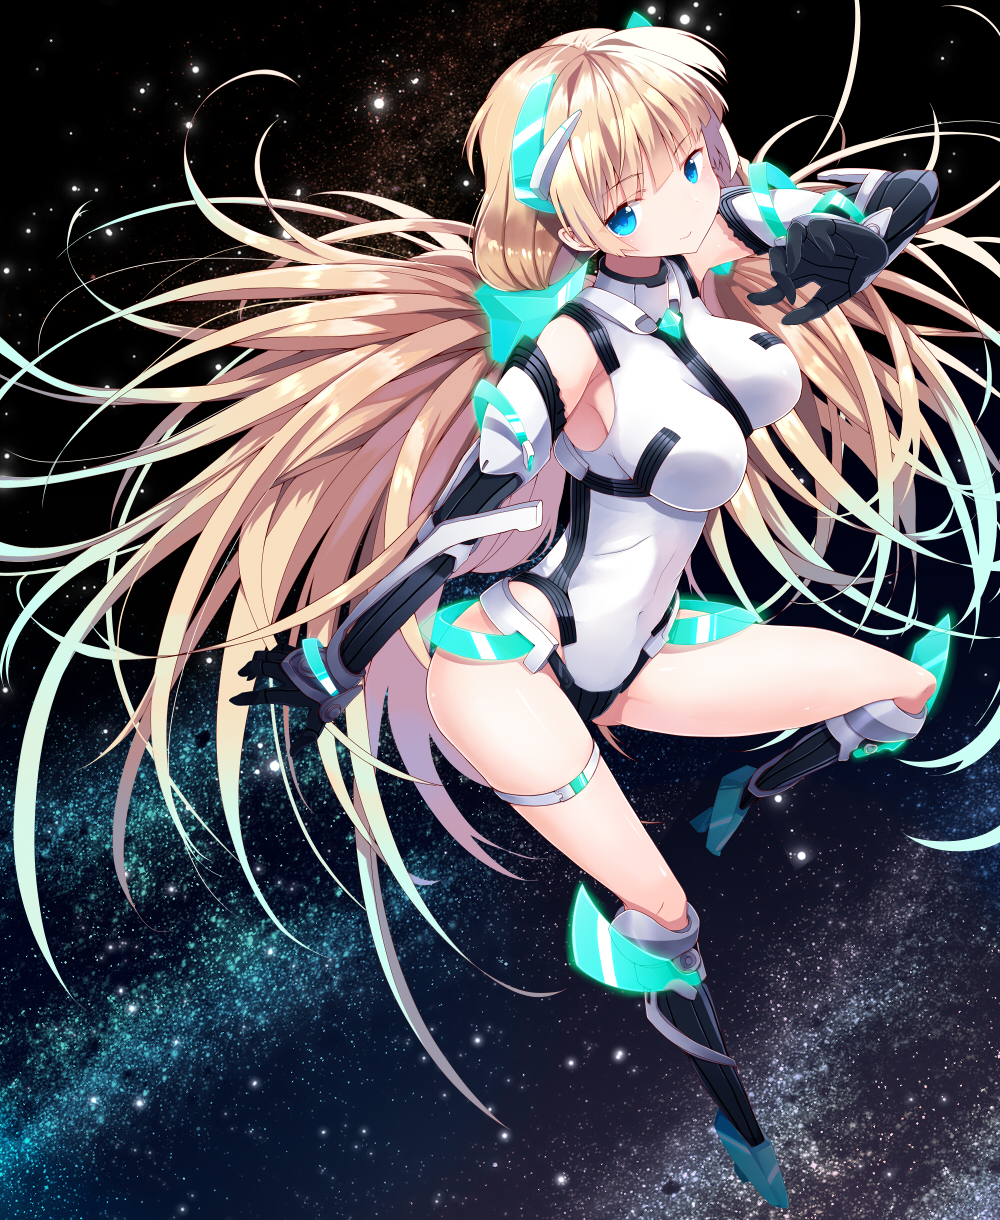 Expelled from paradise anime download torrent ssrs interview questions and answers ebook torrents